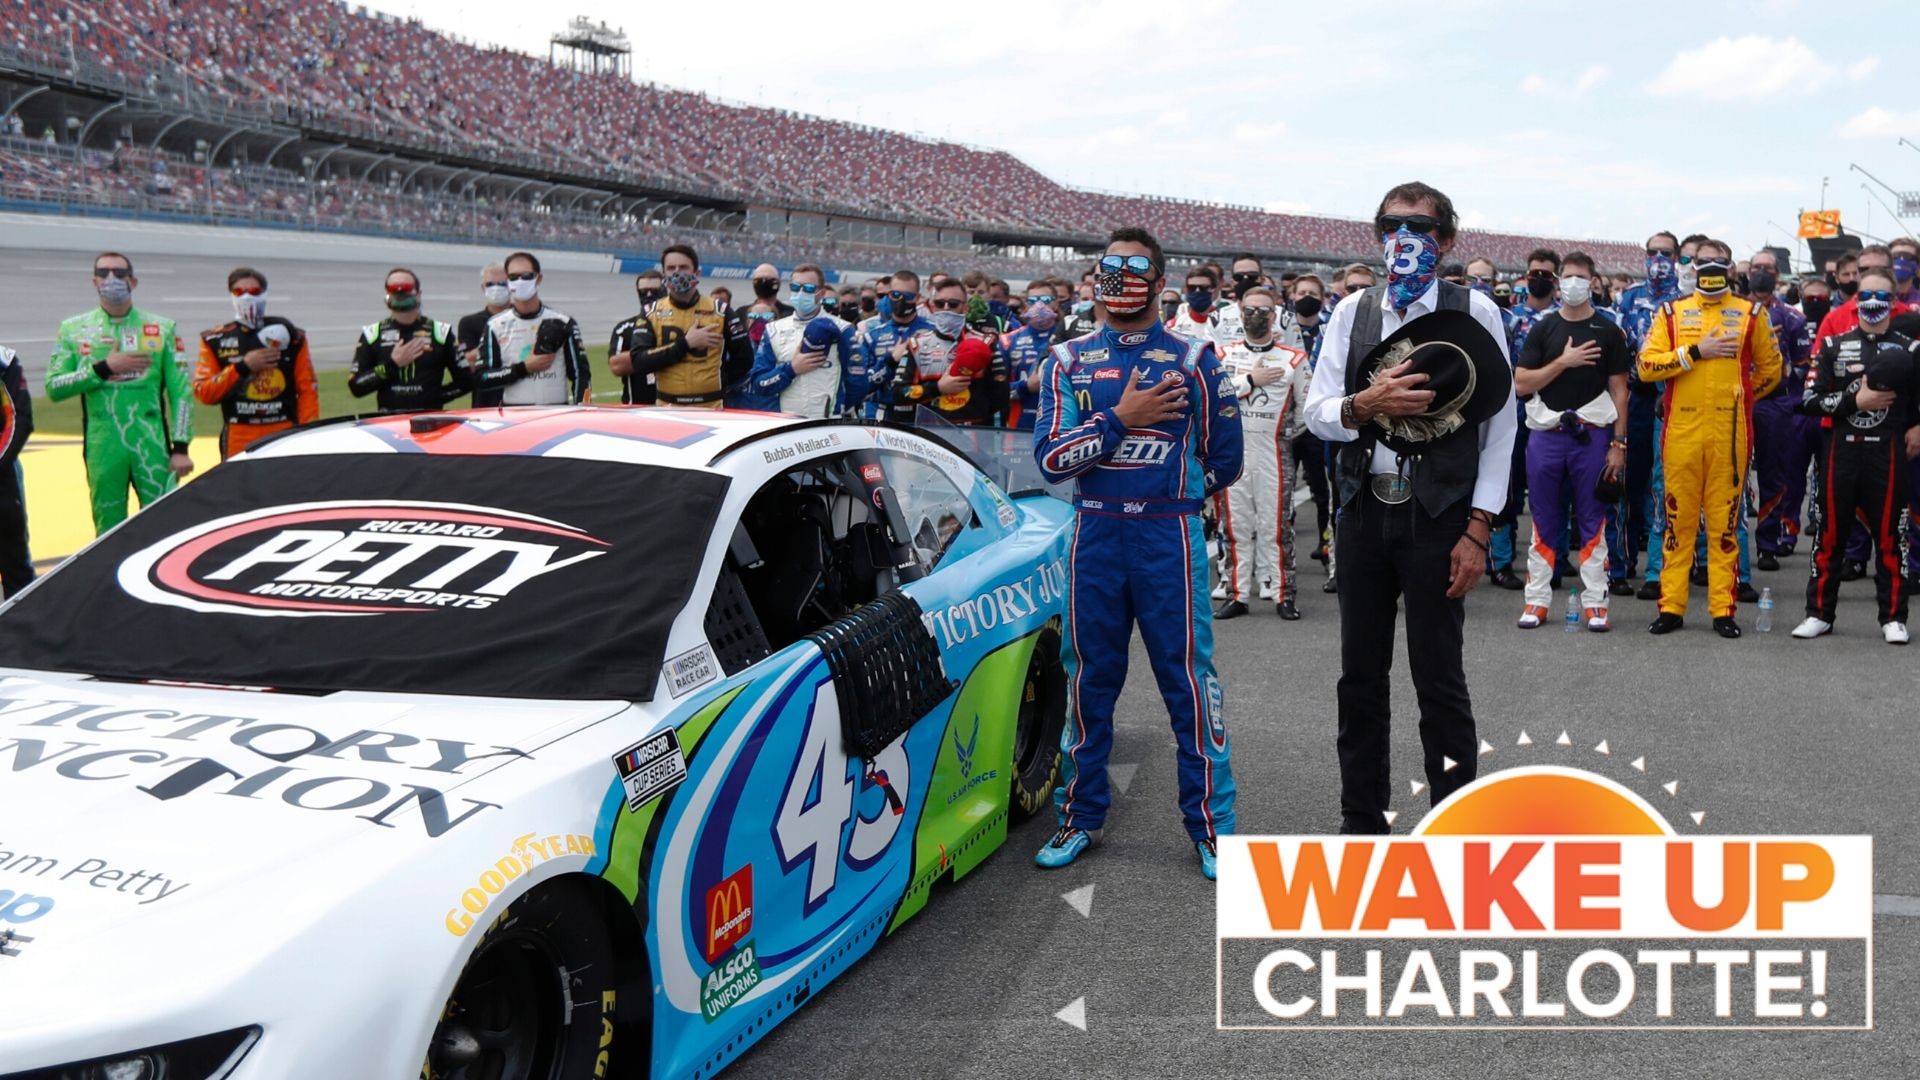 NASCAR driver Bubba Wallace made an emotional return to the track Monday, with all of the drivers rallying behind him after a noose was found in the garage Sunday.